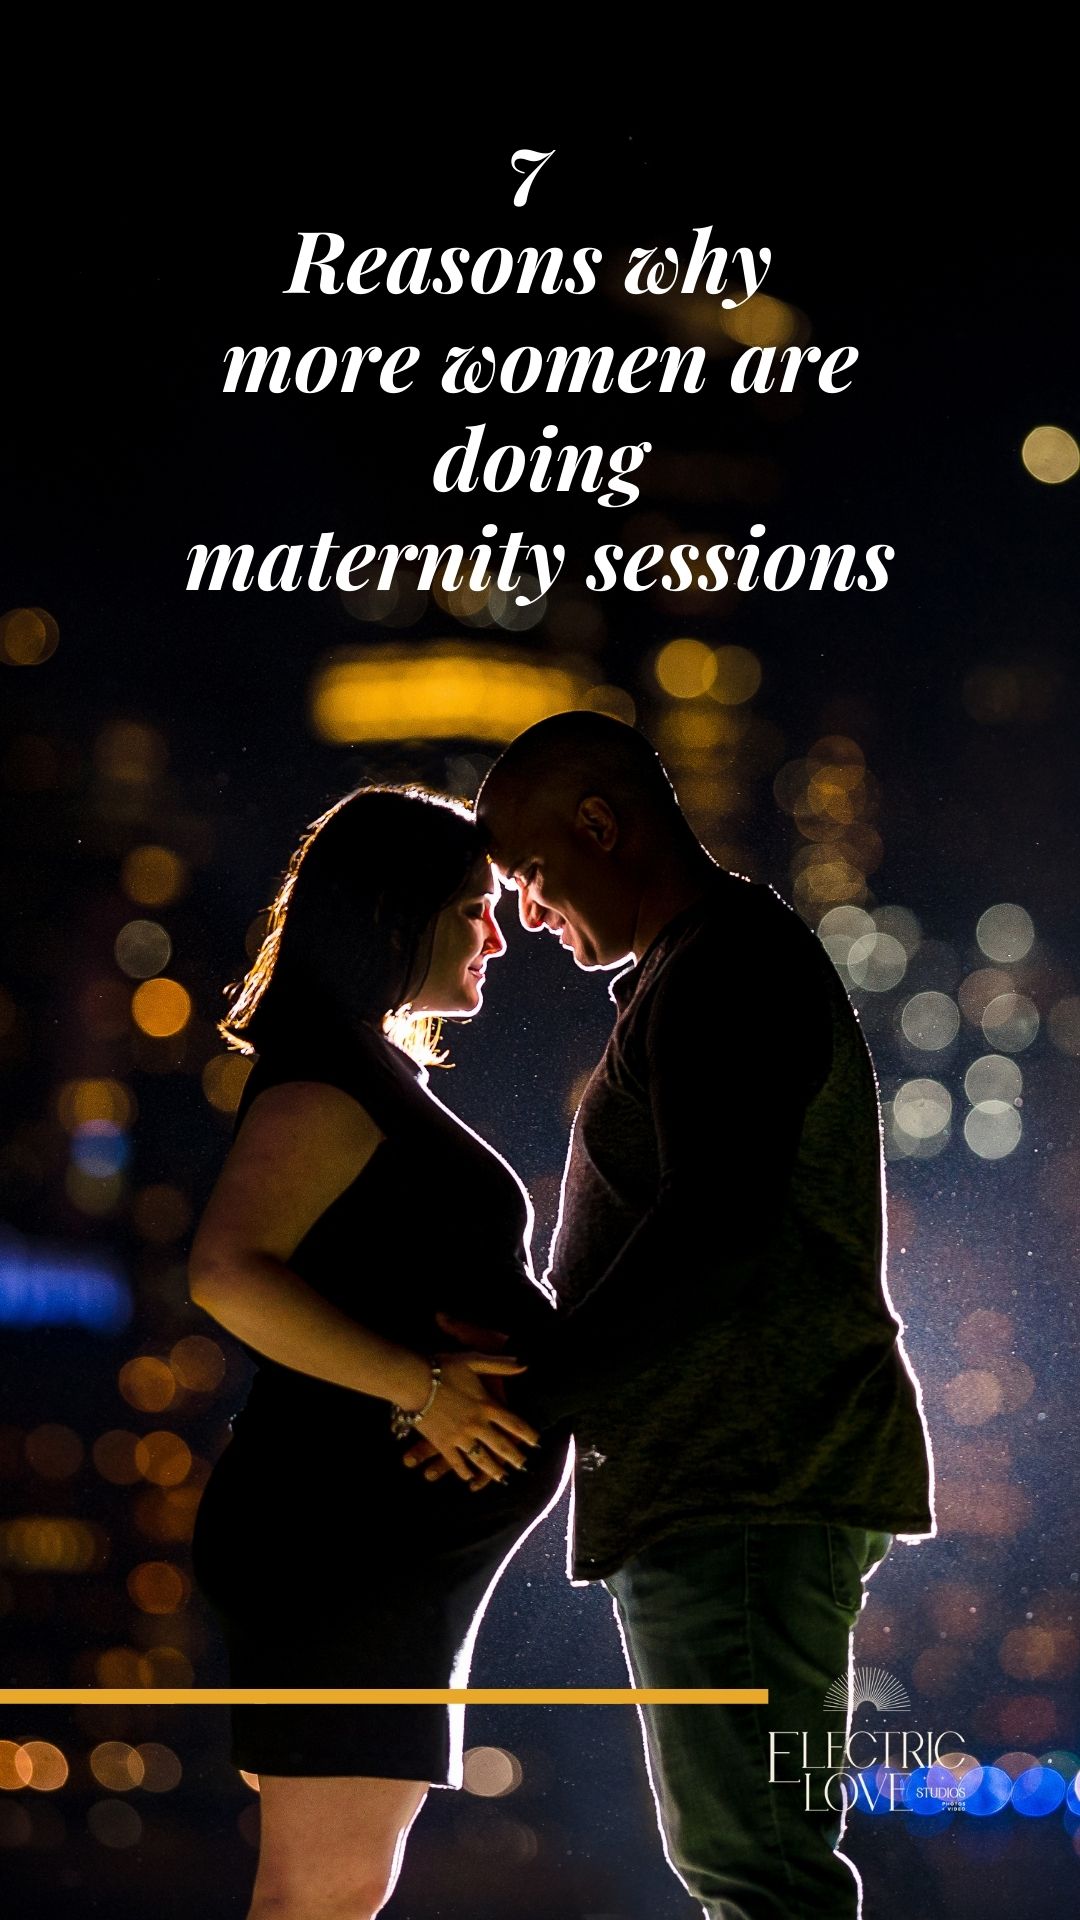 7-reasons-why-more-women-are-doing-maternity-sessions